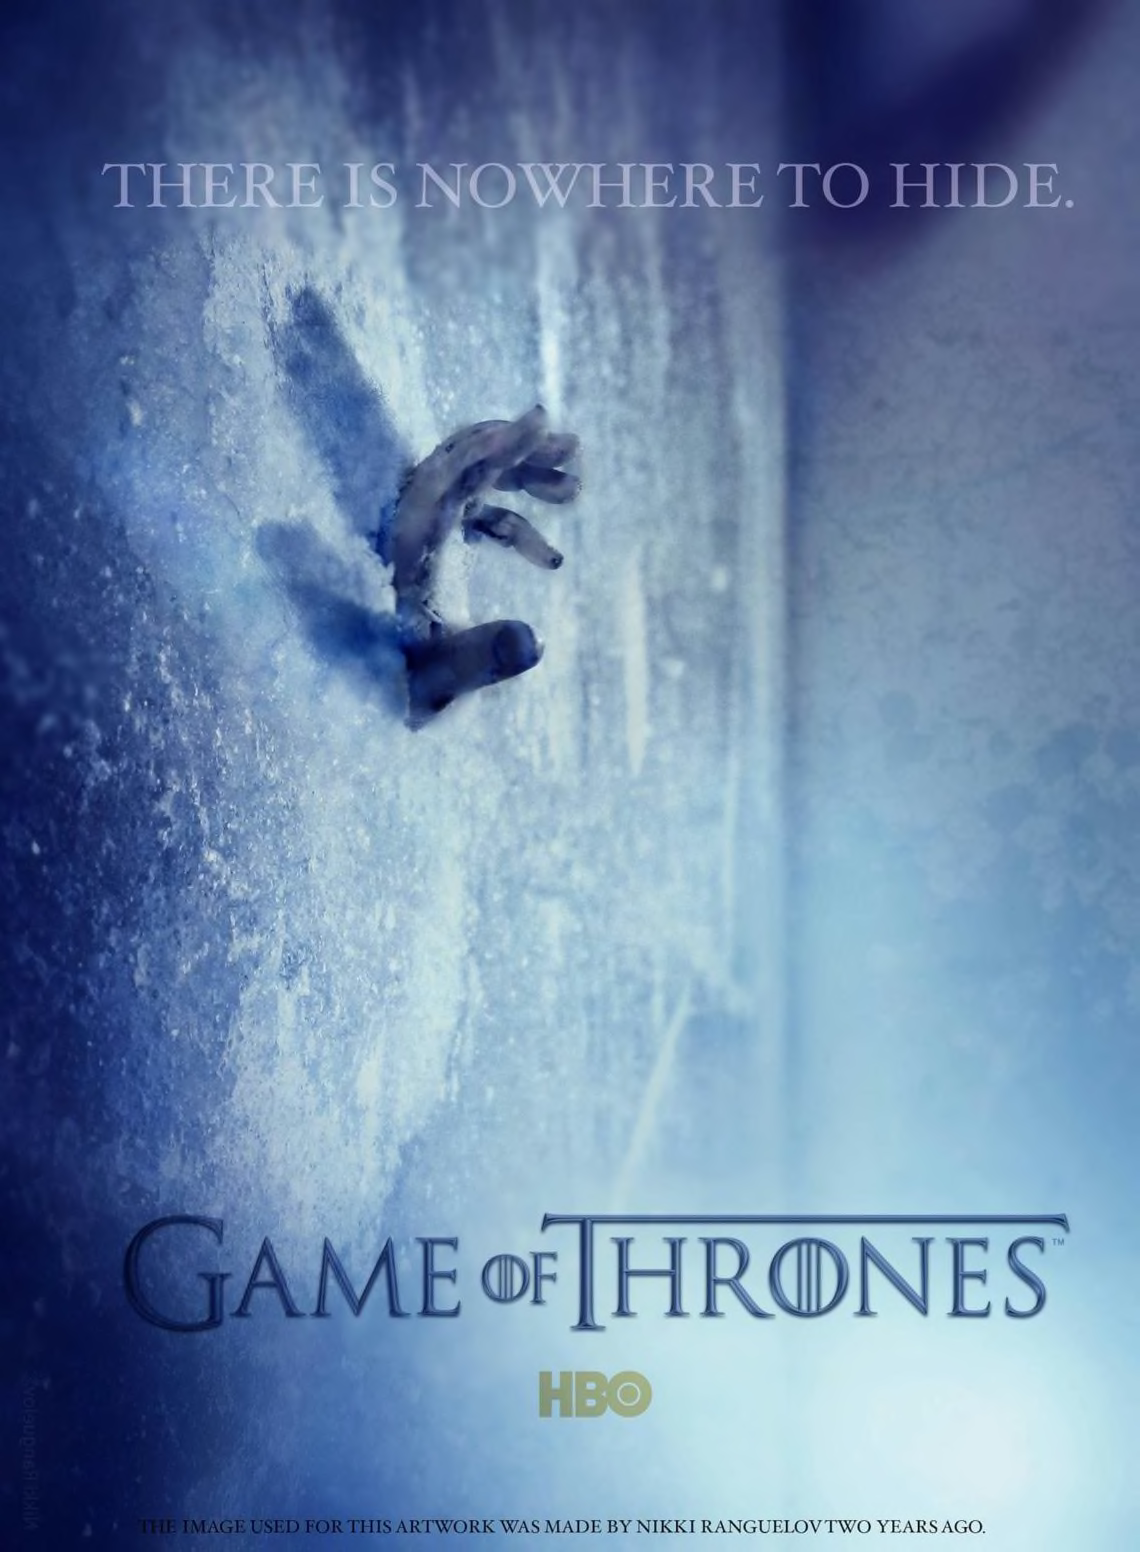 Hbo S Official Poster For Game Of Thrones Season 7 Vs Fan Made Ones